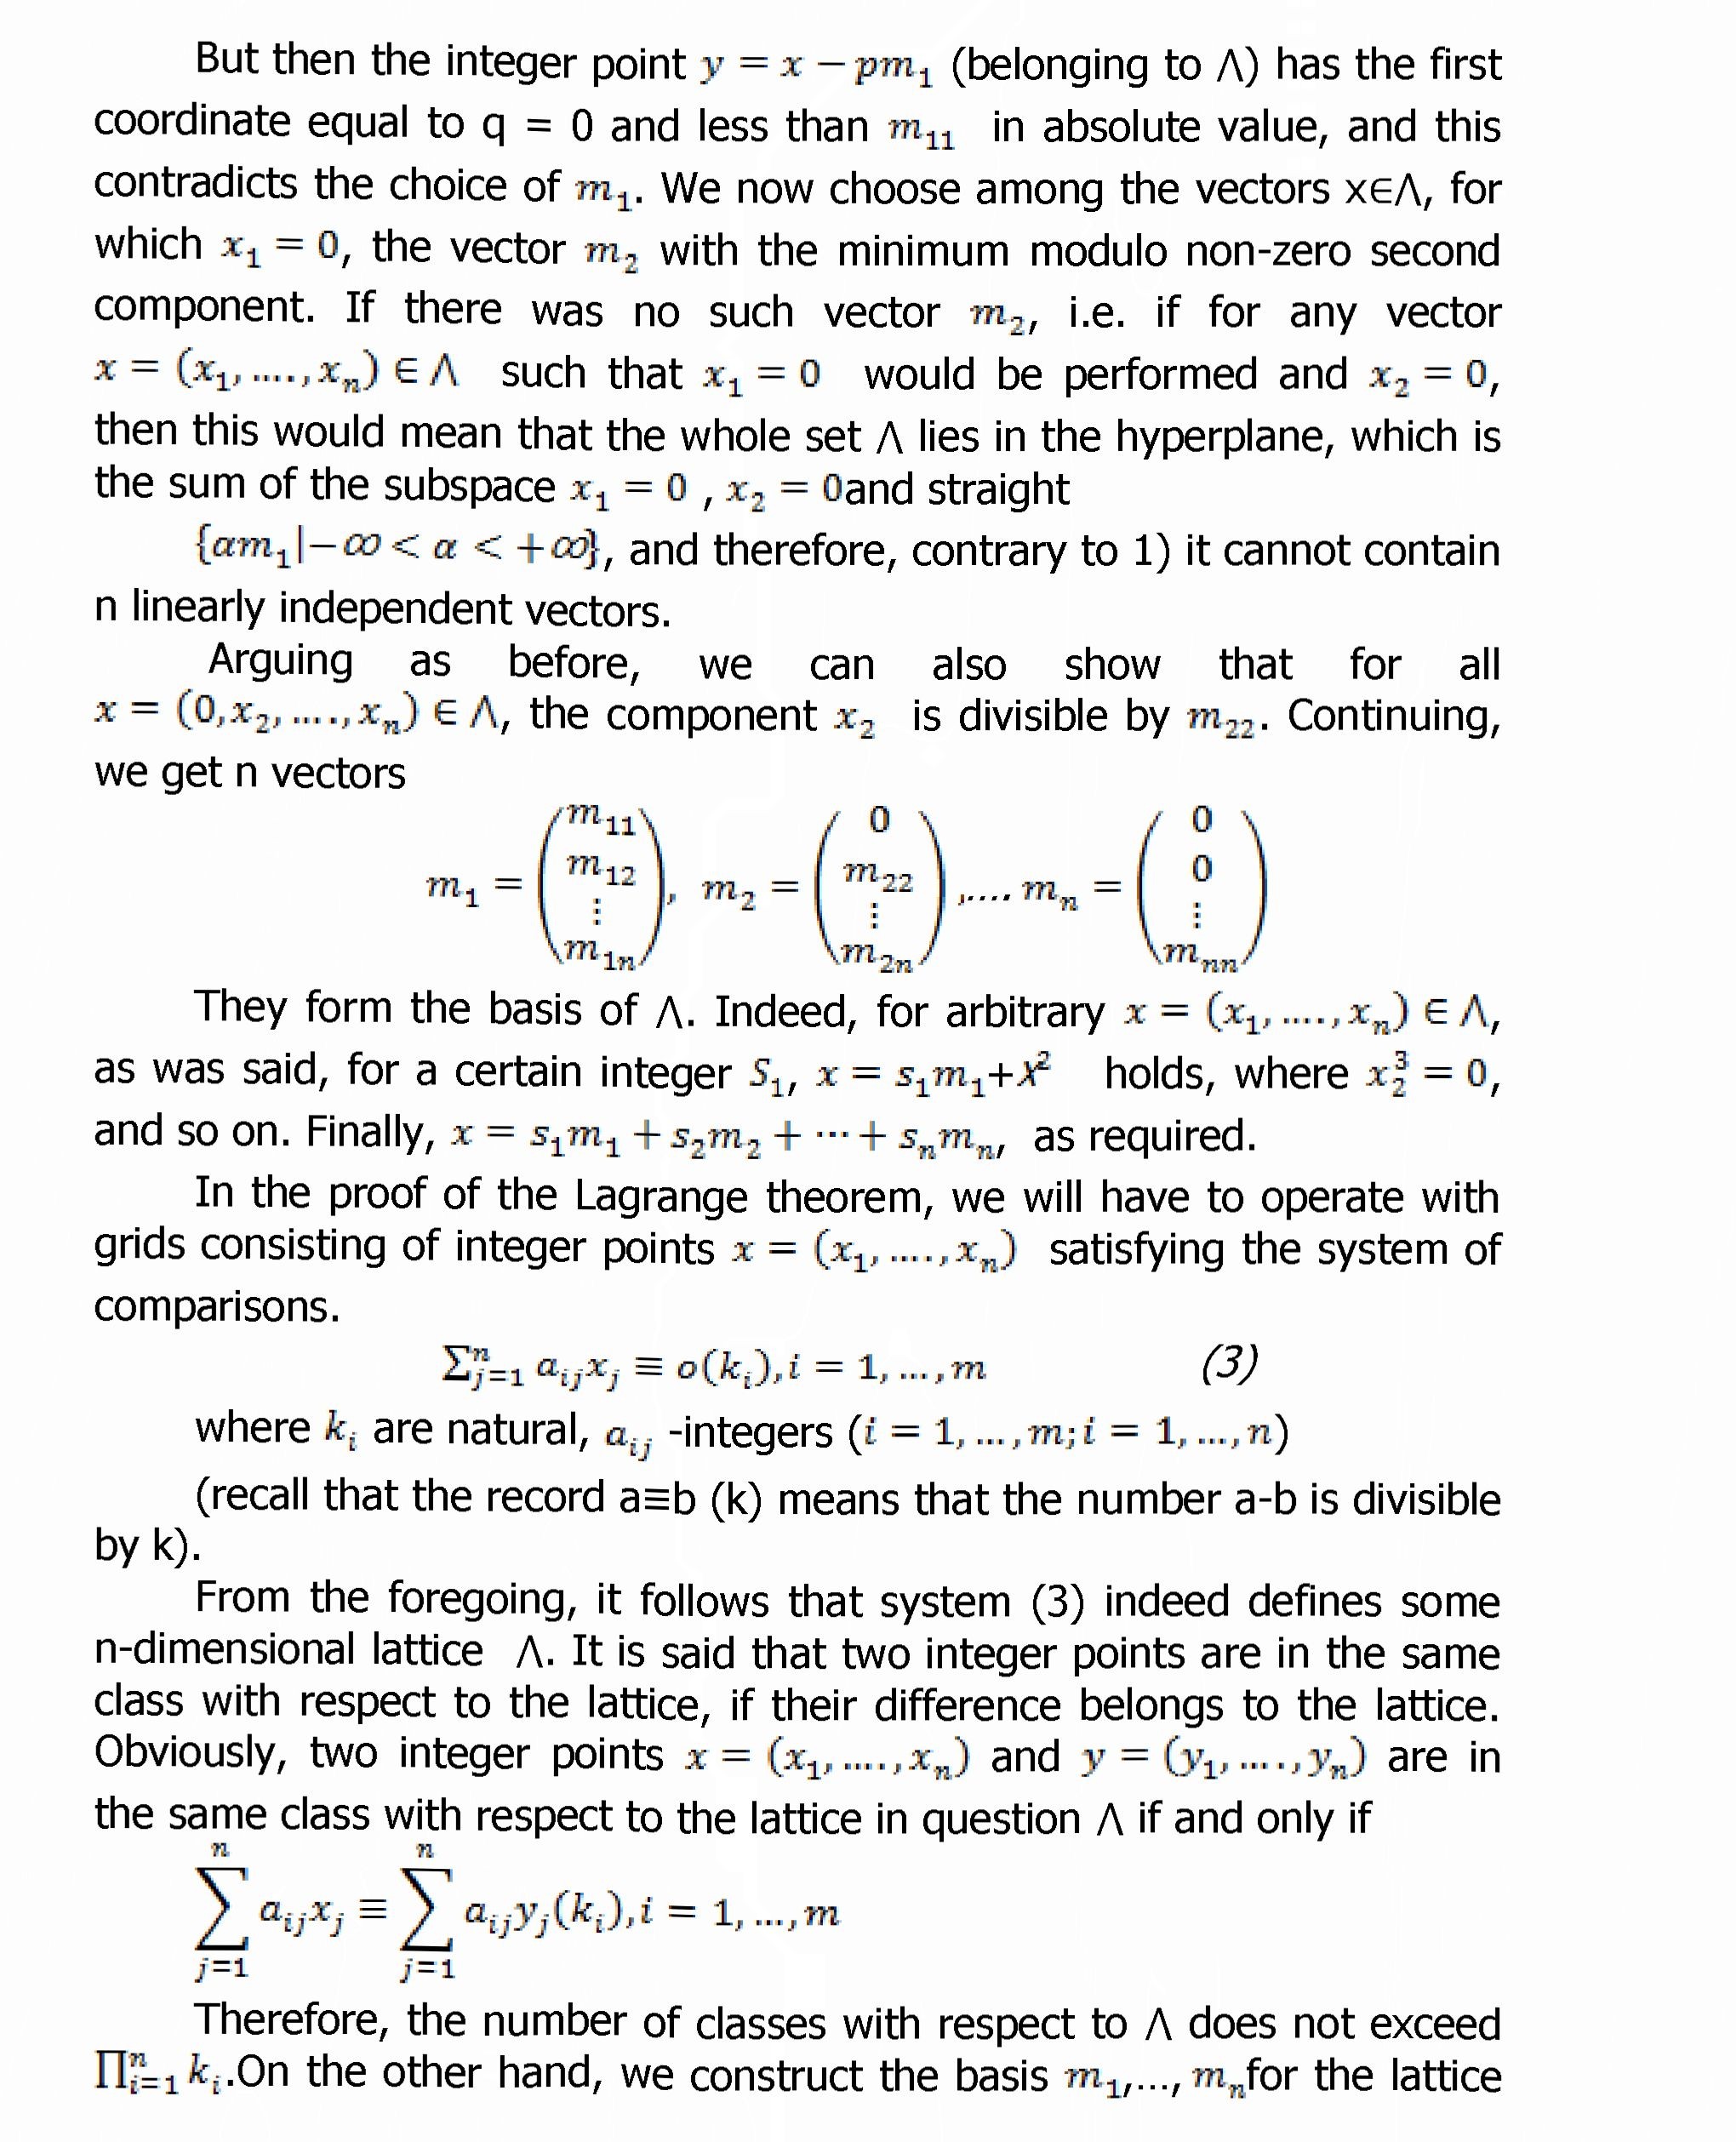 About one application of the minkowski theorem